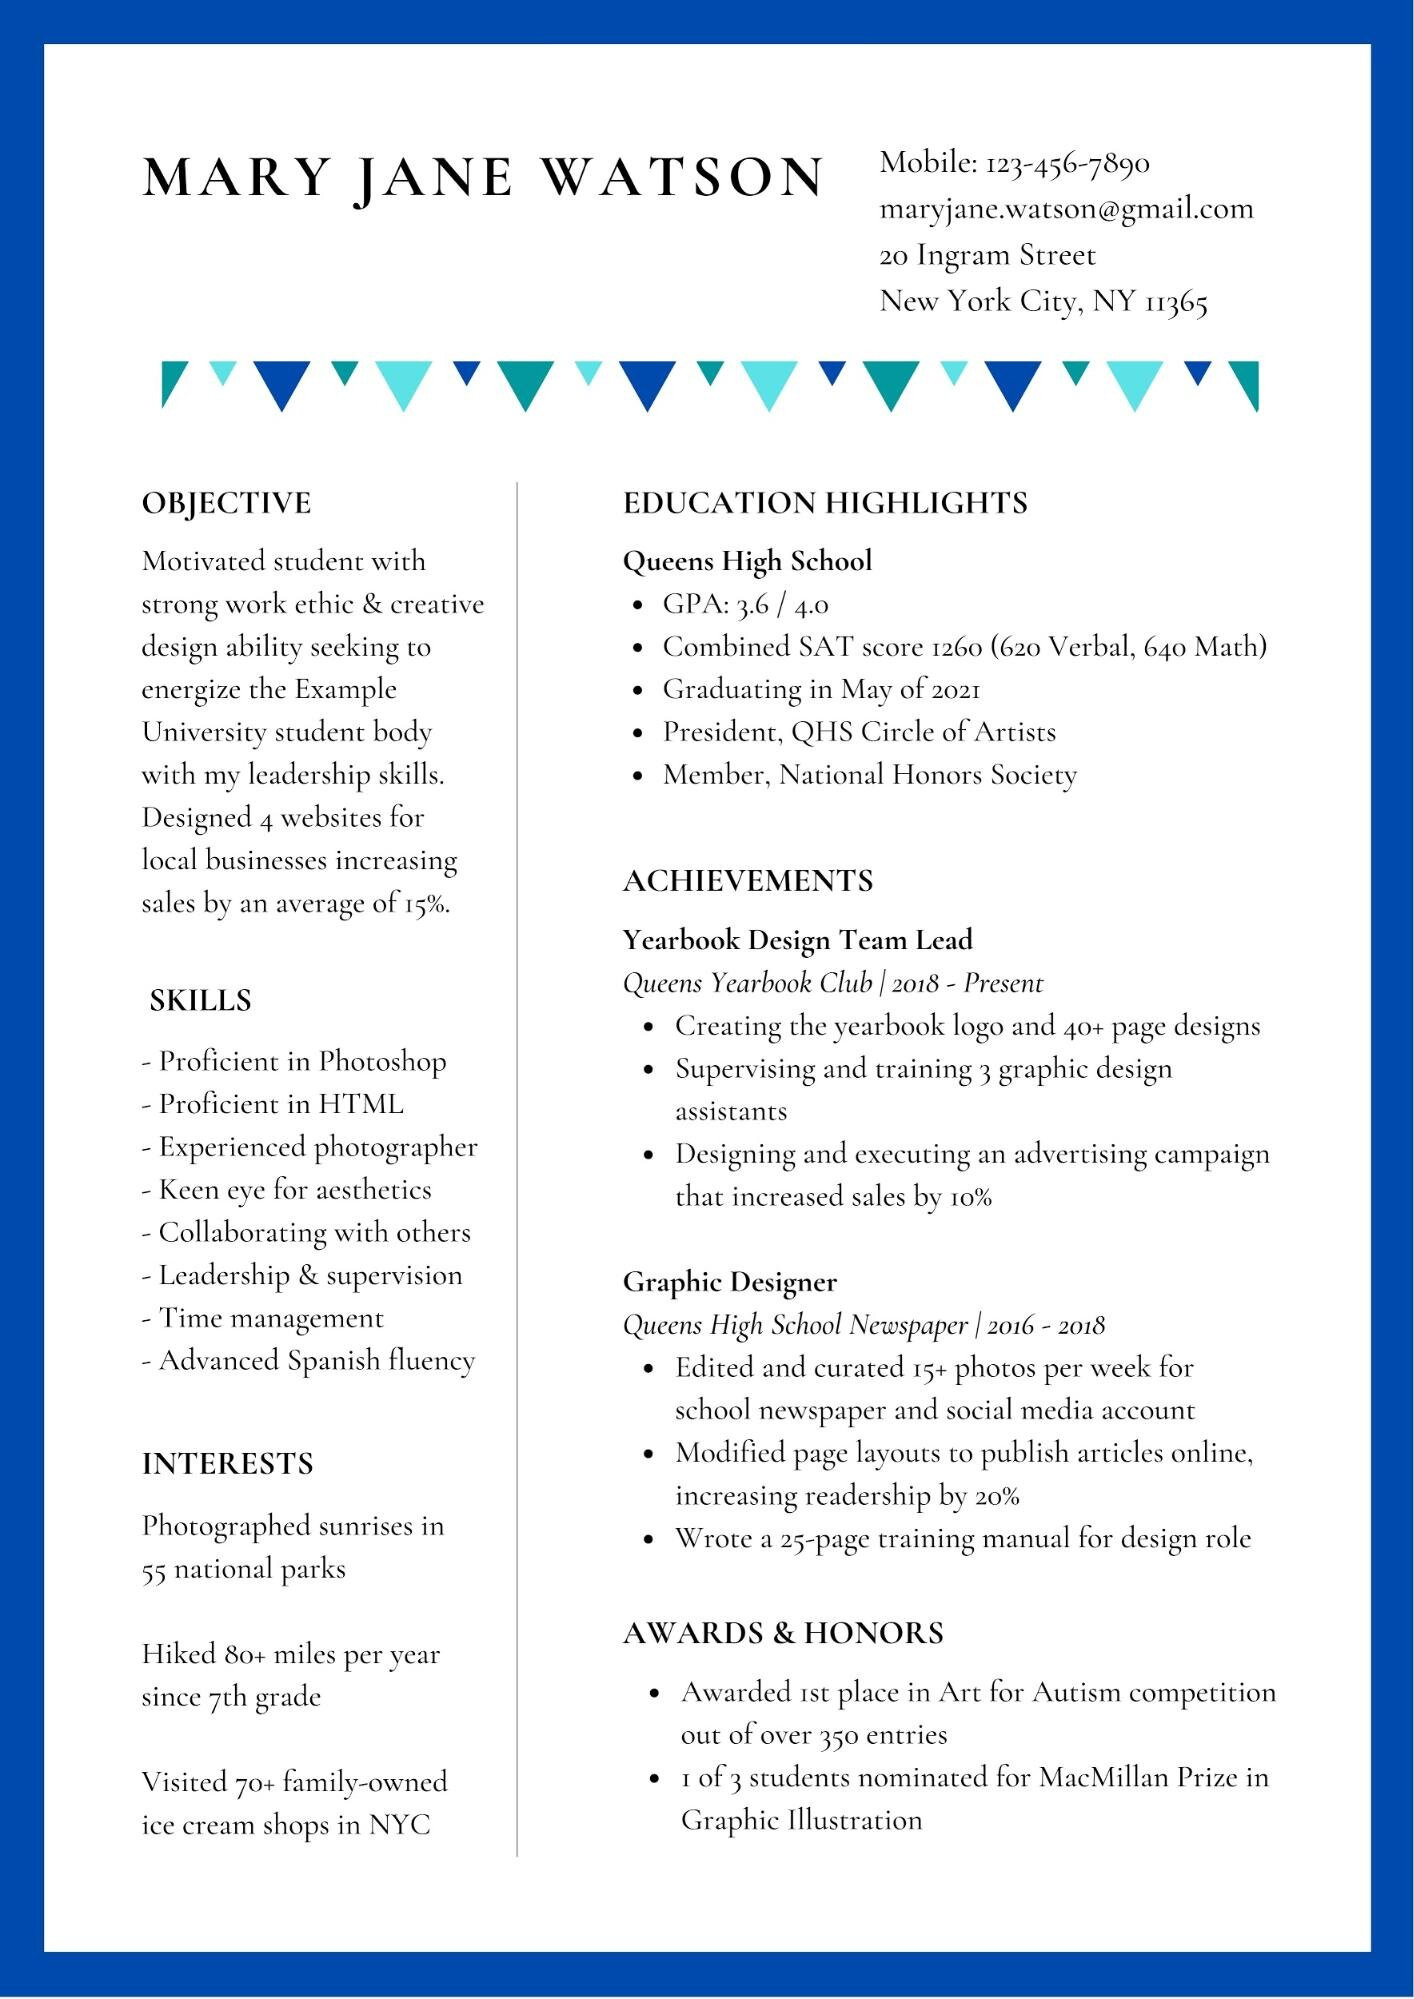 Sample High School Resume for College Applications How to Create the Perfect College Application Resume â Ponder College